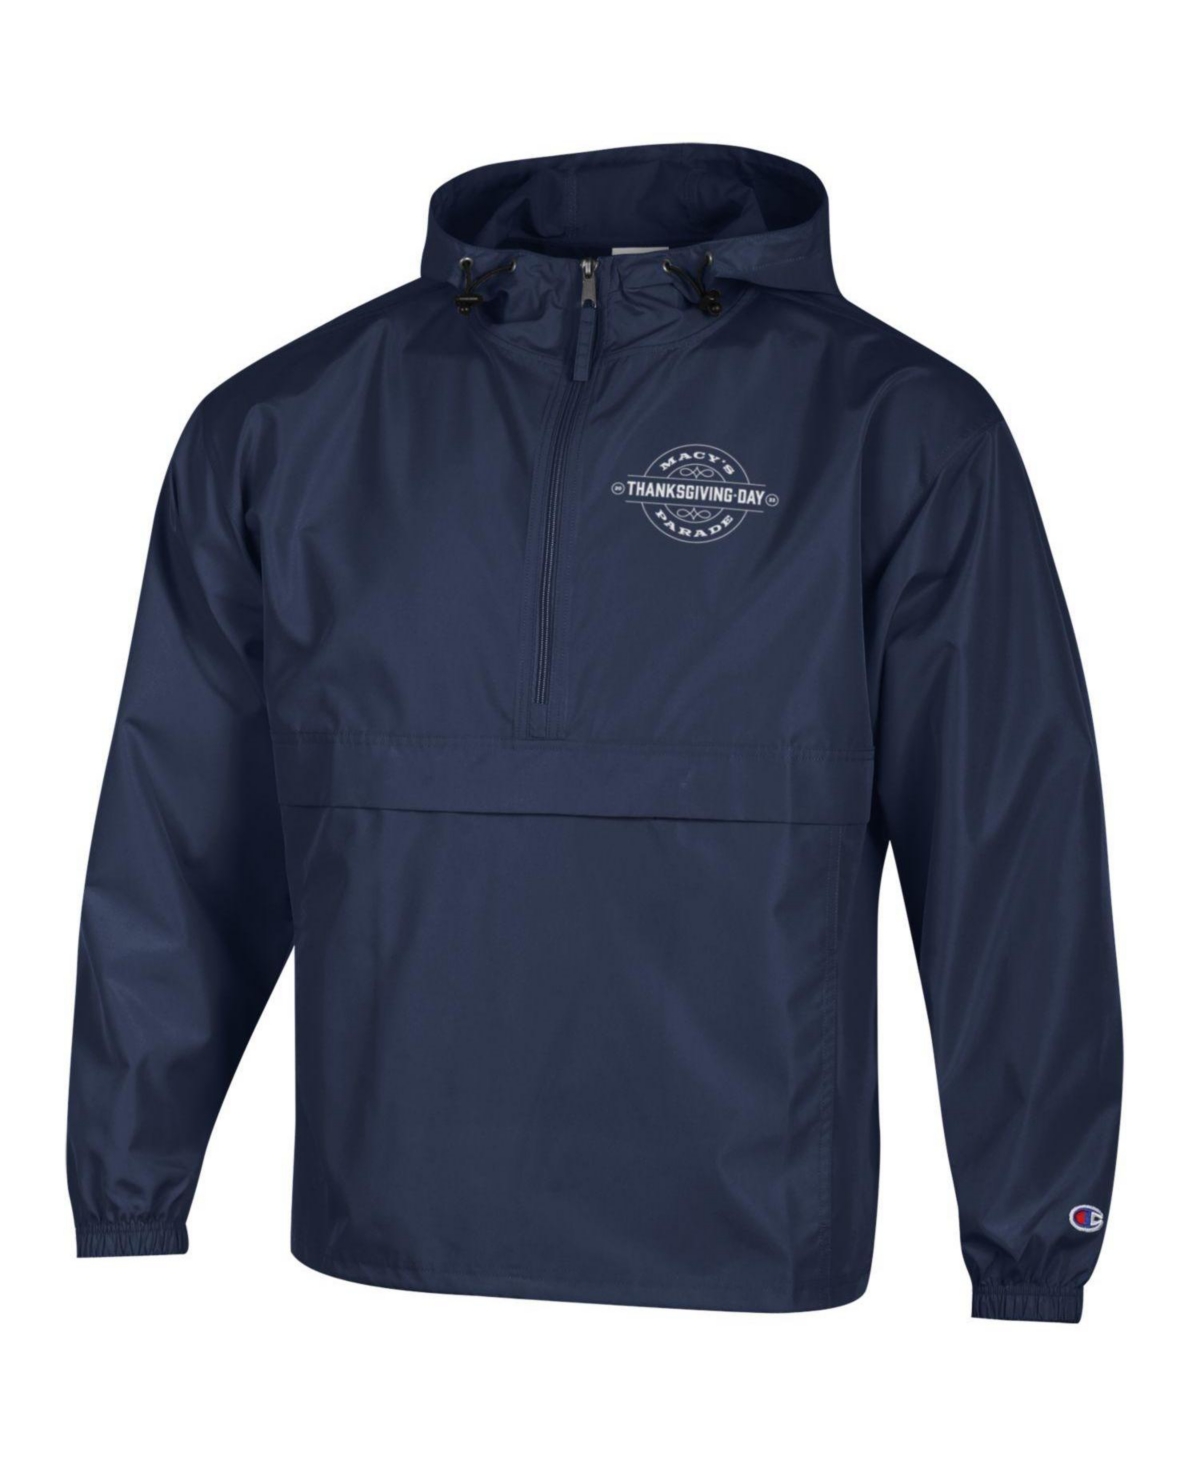 Champion Macy's Thanksgiving Day Parade Packable Jacket - Marine Navy